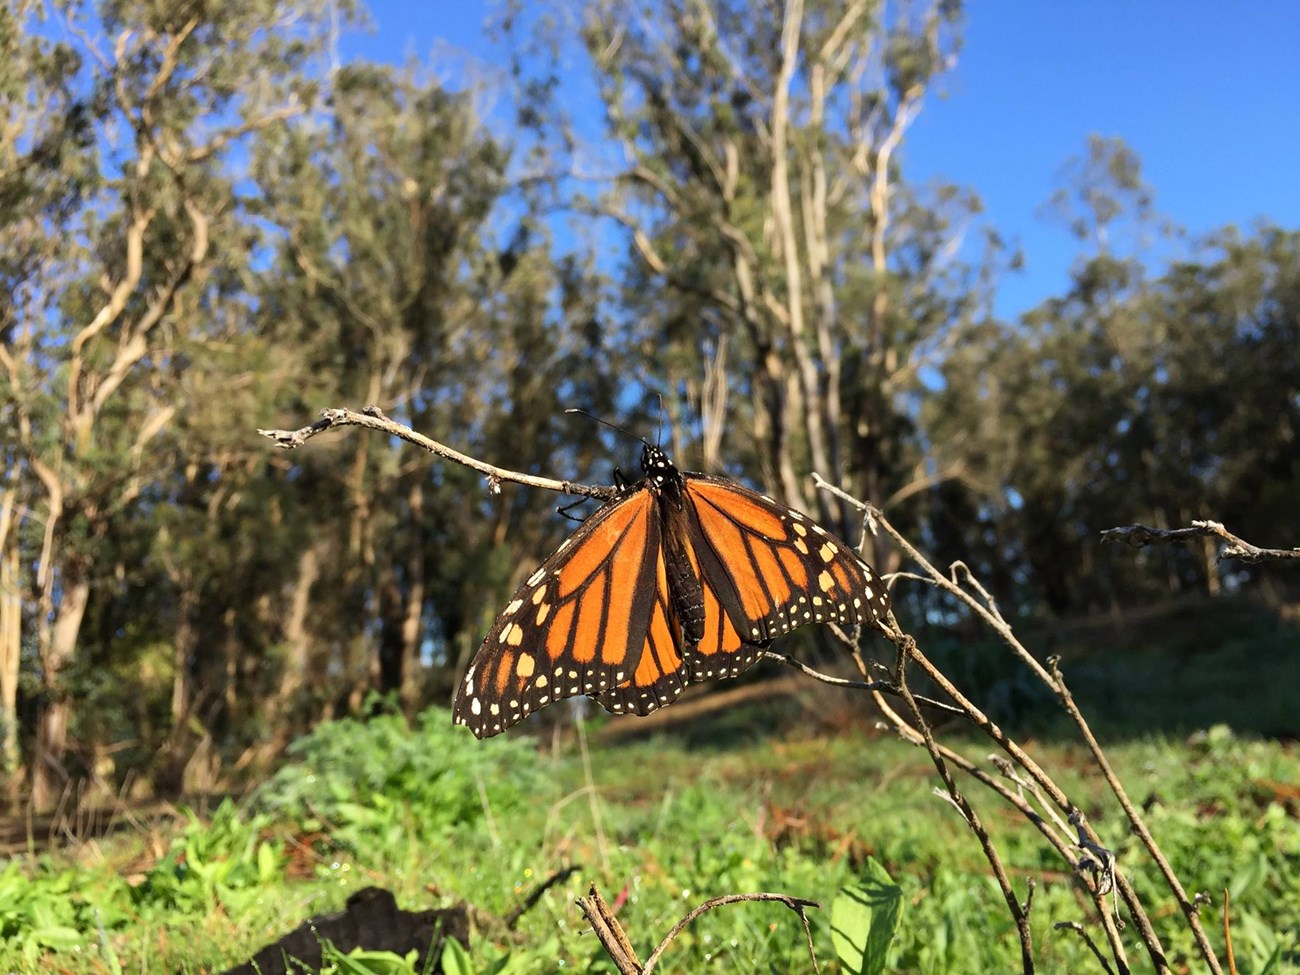 Orange and black butterfly resting on a twig. Eucalyptus trees stand in the background.